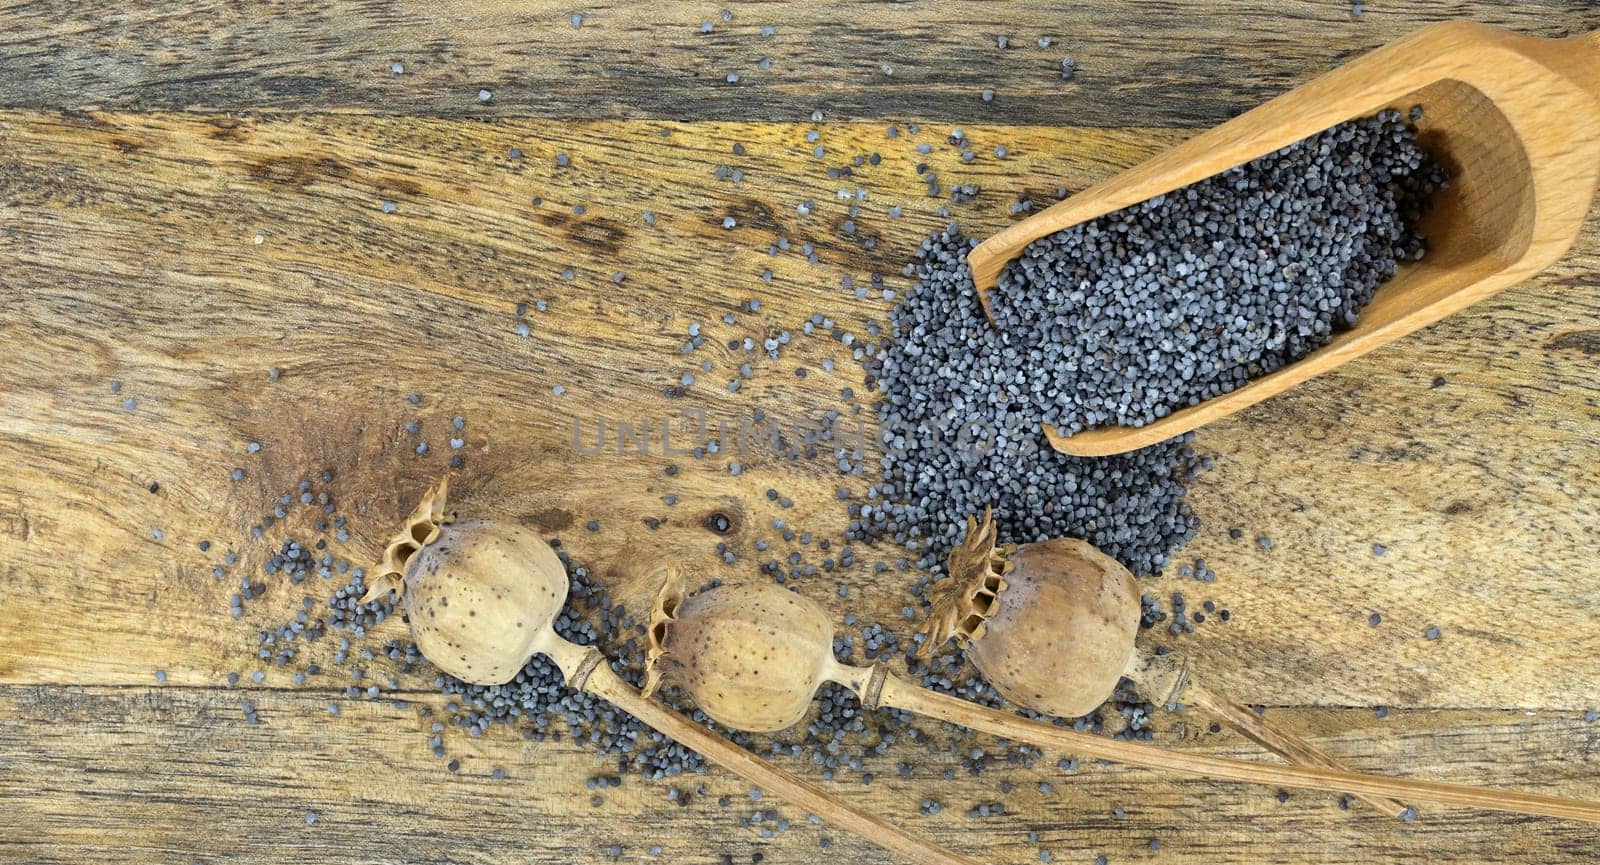 Black poppy seeds and dried heads of poppies strewn by NetPix